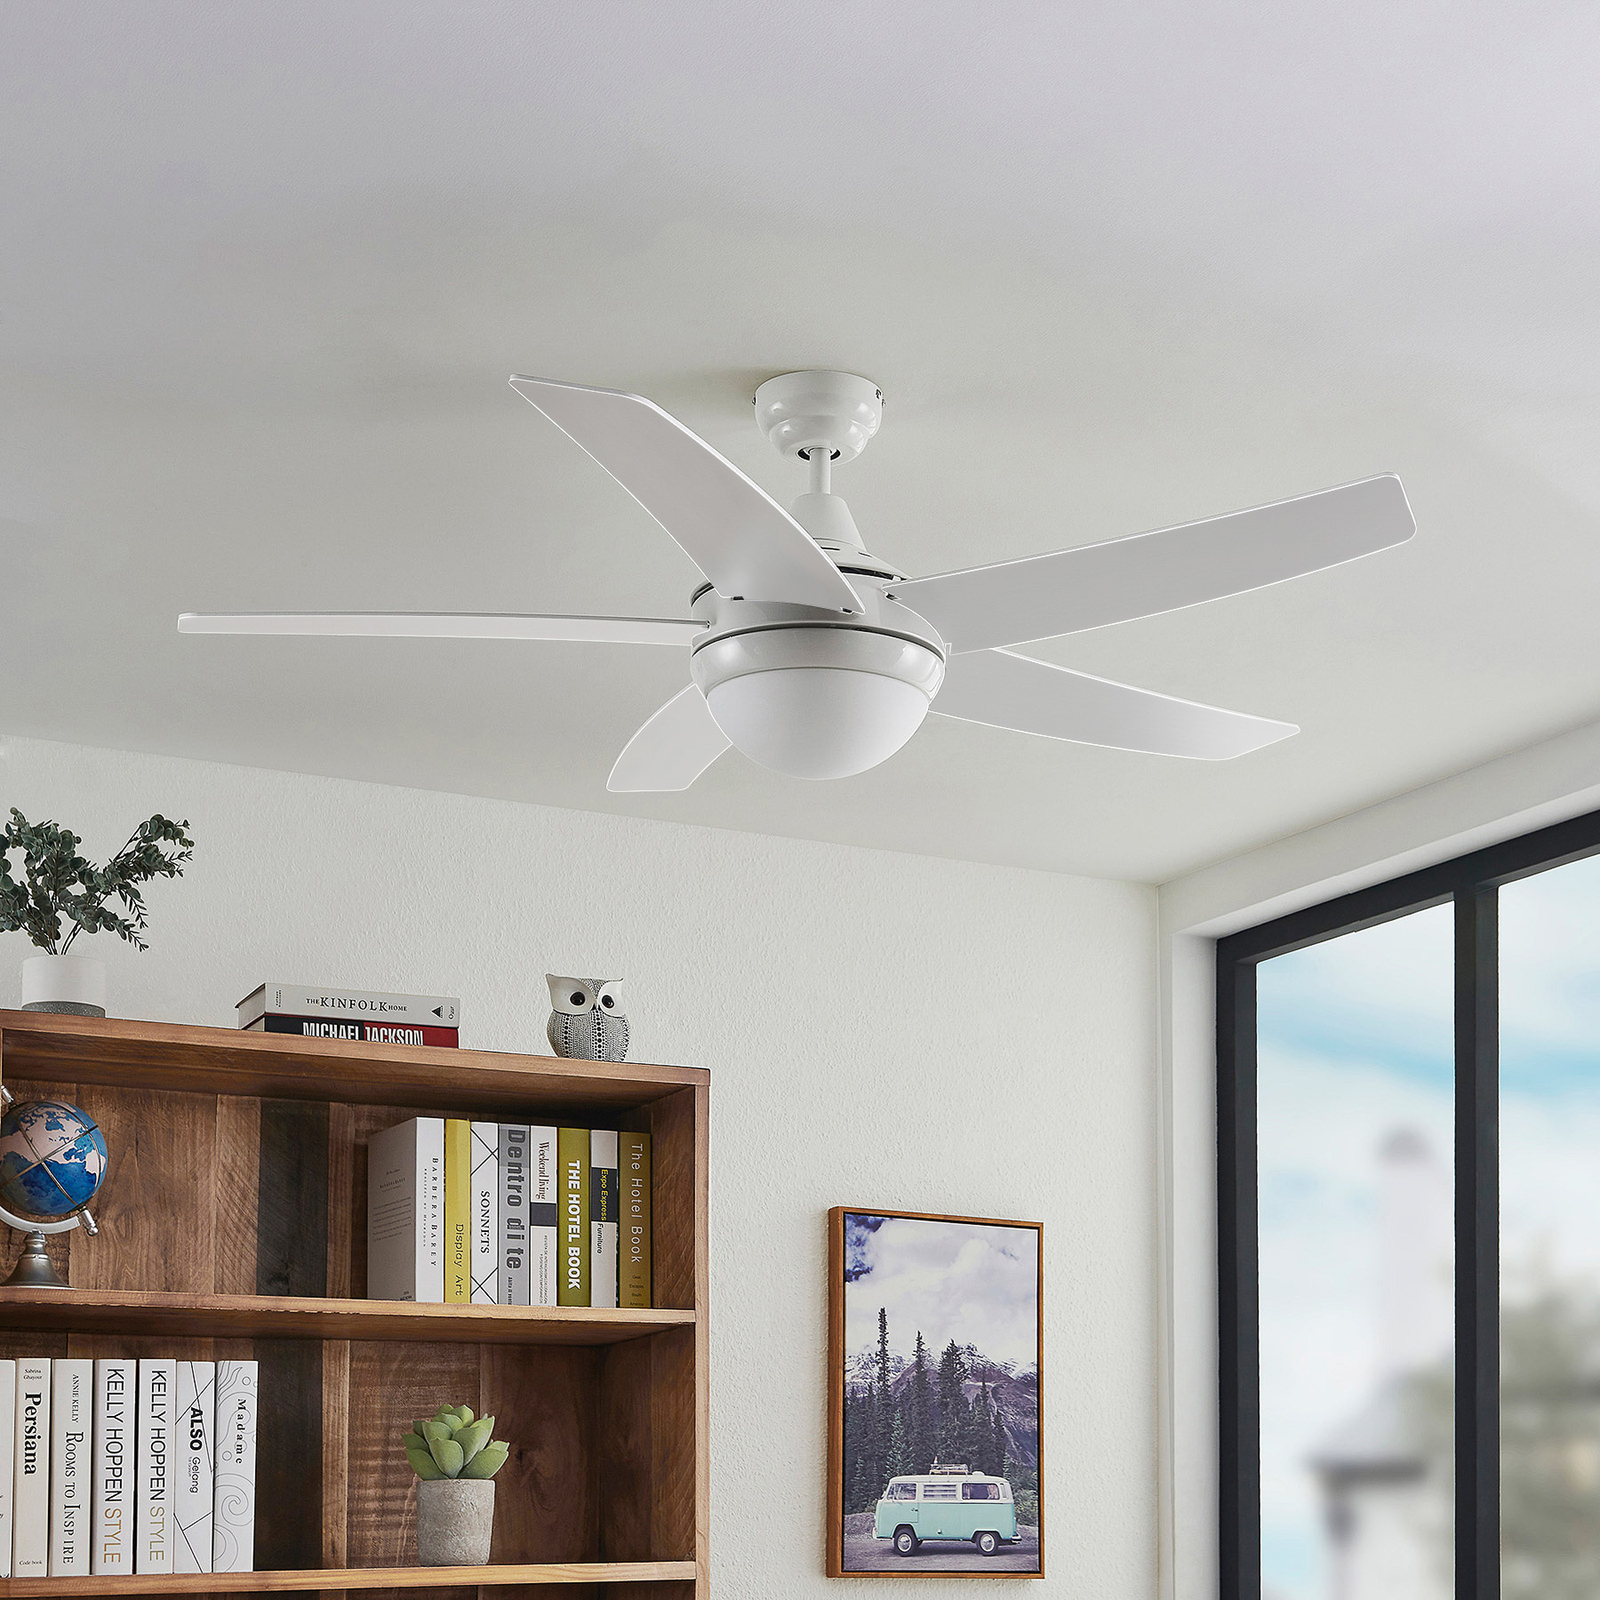 Lindby ceiling fan with light Auraya, quiet, white, 130cm